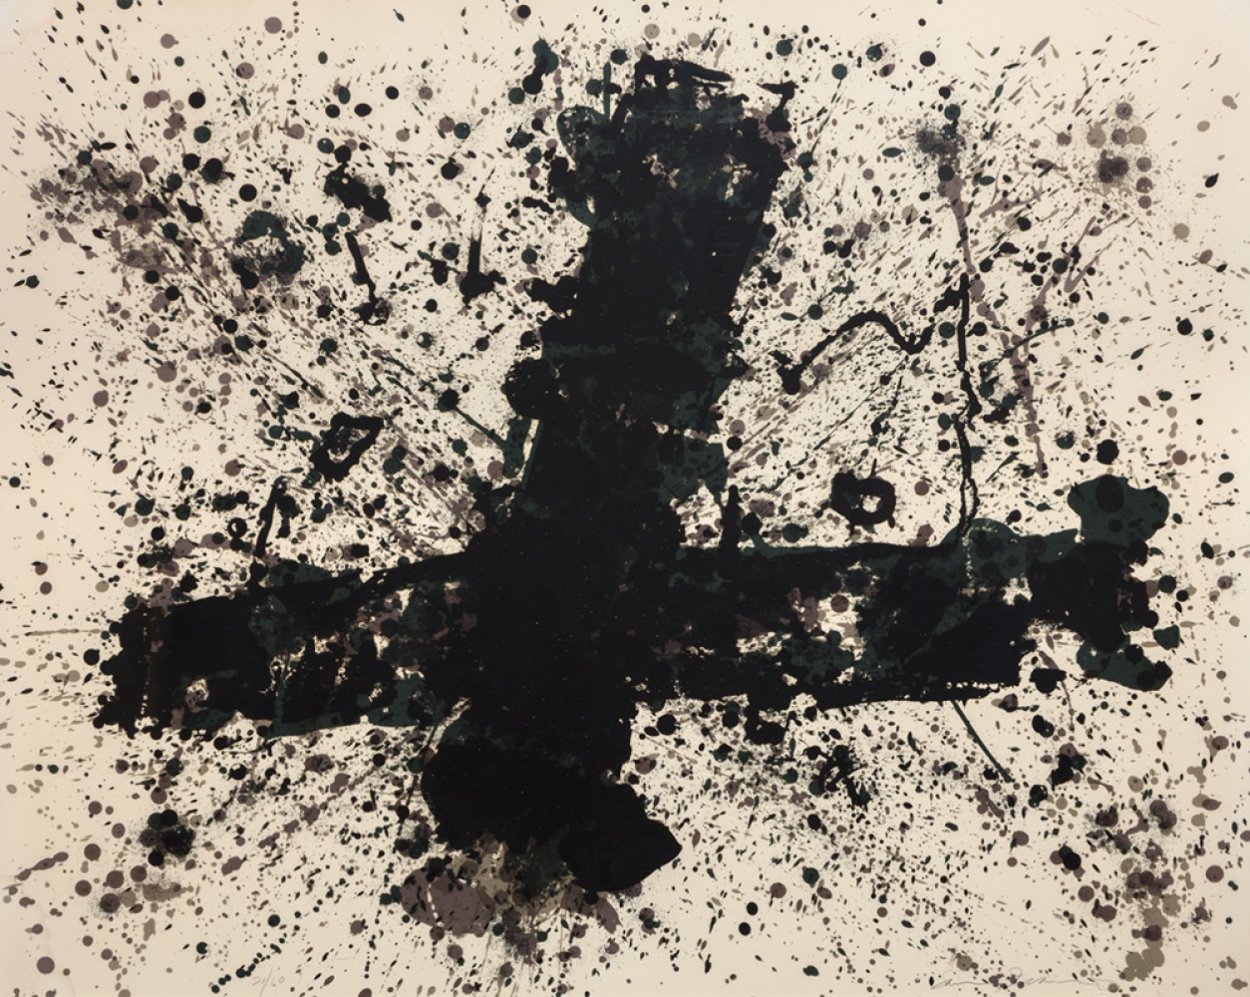 Burnout 1974 Limited Edition Print by Sam Francis